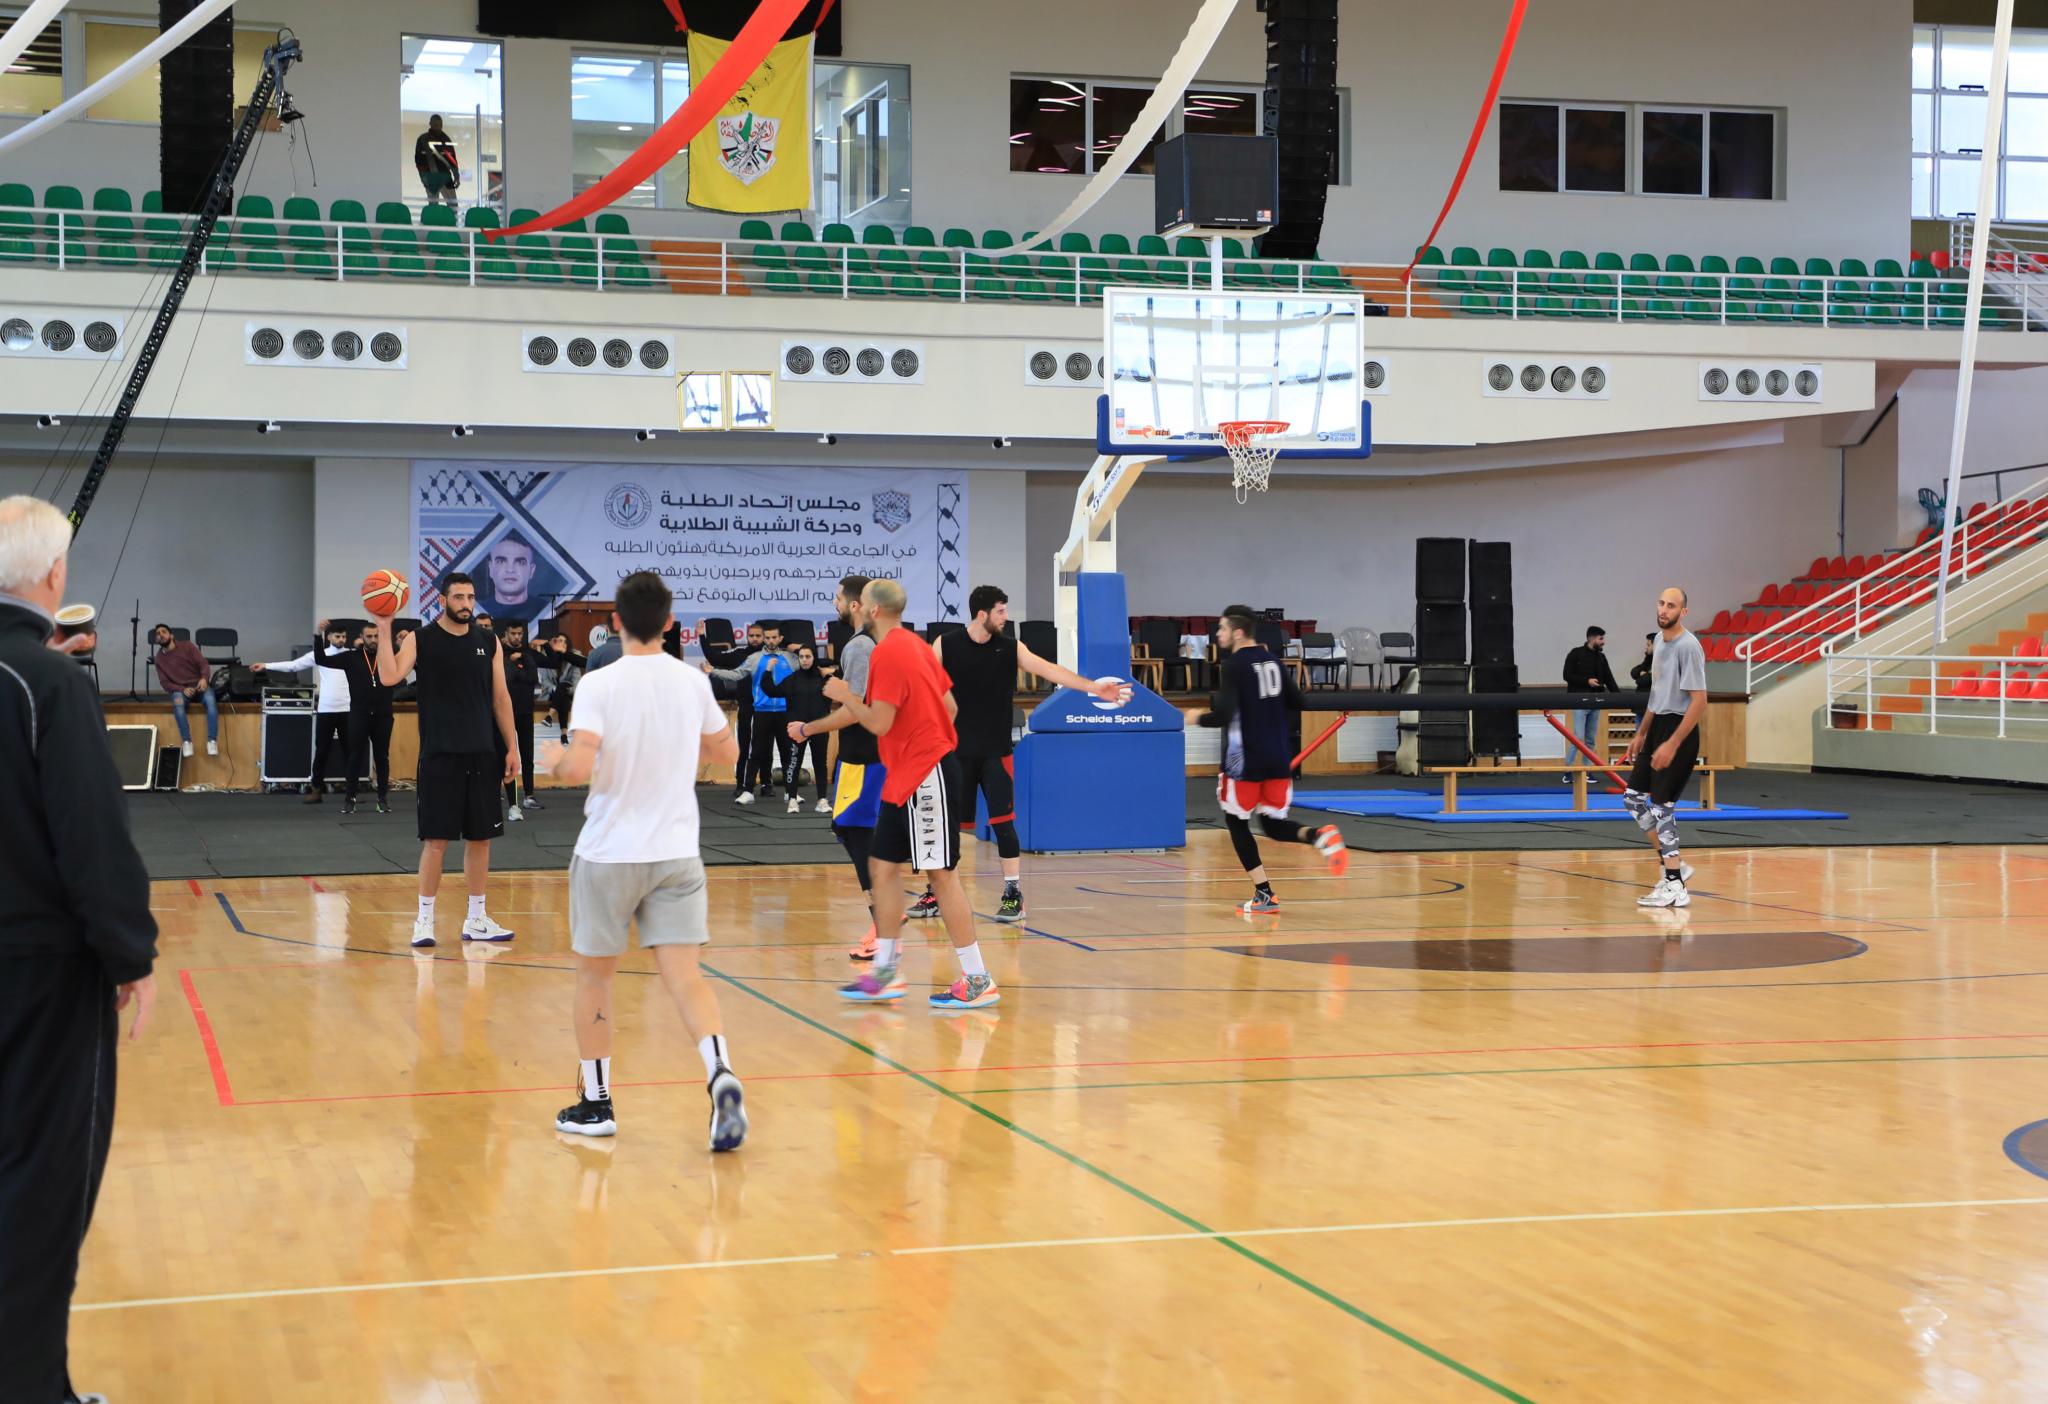 The Trainings of the Palestinian Basketball Team in the Sport Hall in AAUP